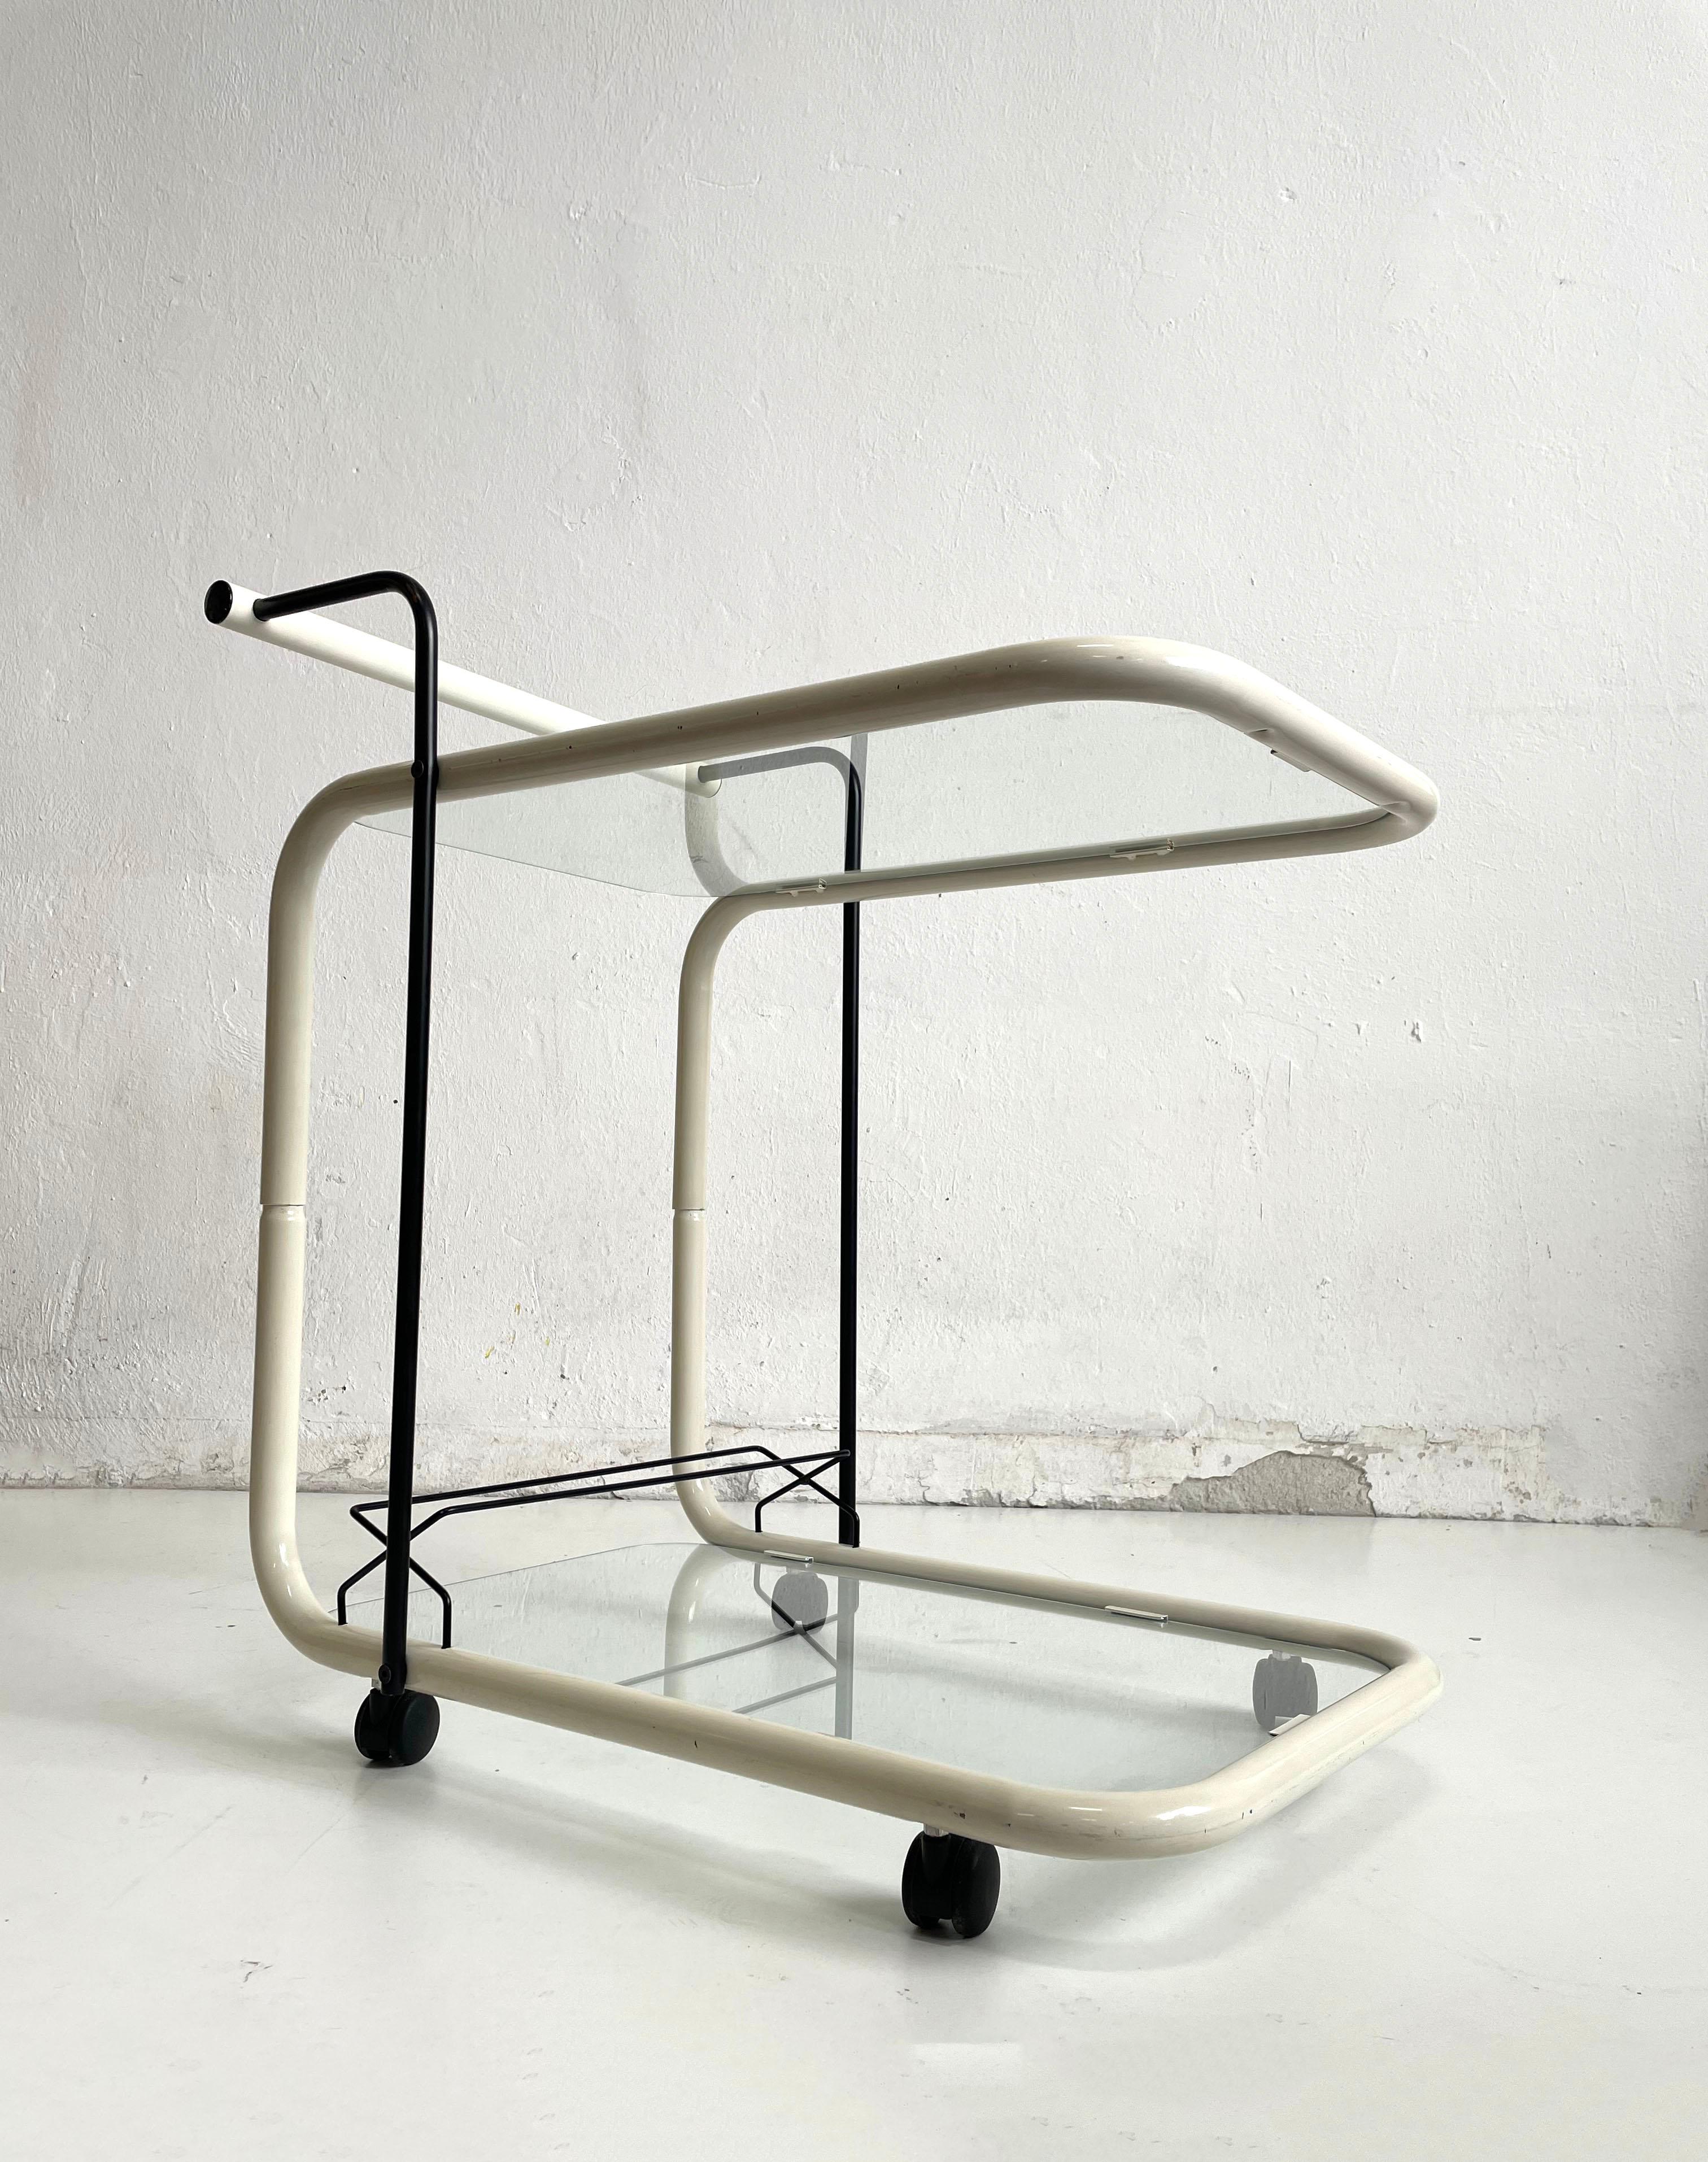 Beautiful modernist Italian designer bar cart from the 1960s or 1970s

Minimalist sculptural, Bauhaus style structure is made of bent metal tubes painted in ivory white colour. The details of the handle and the liquor rack is painted in black.